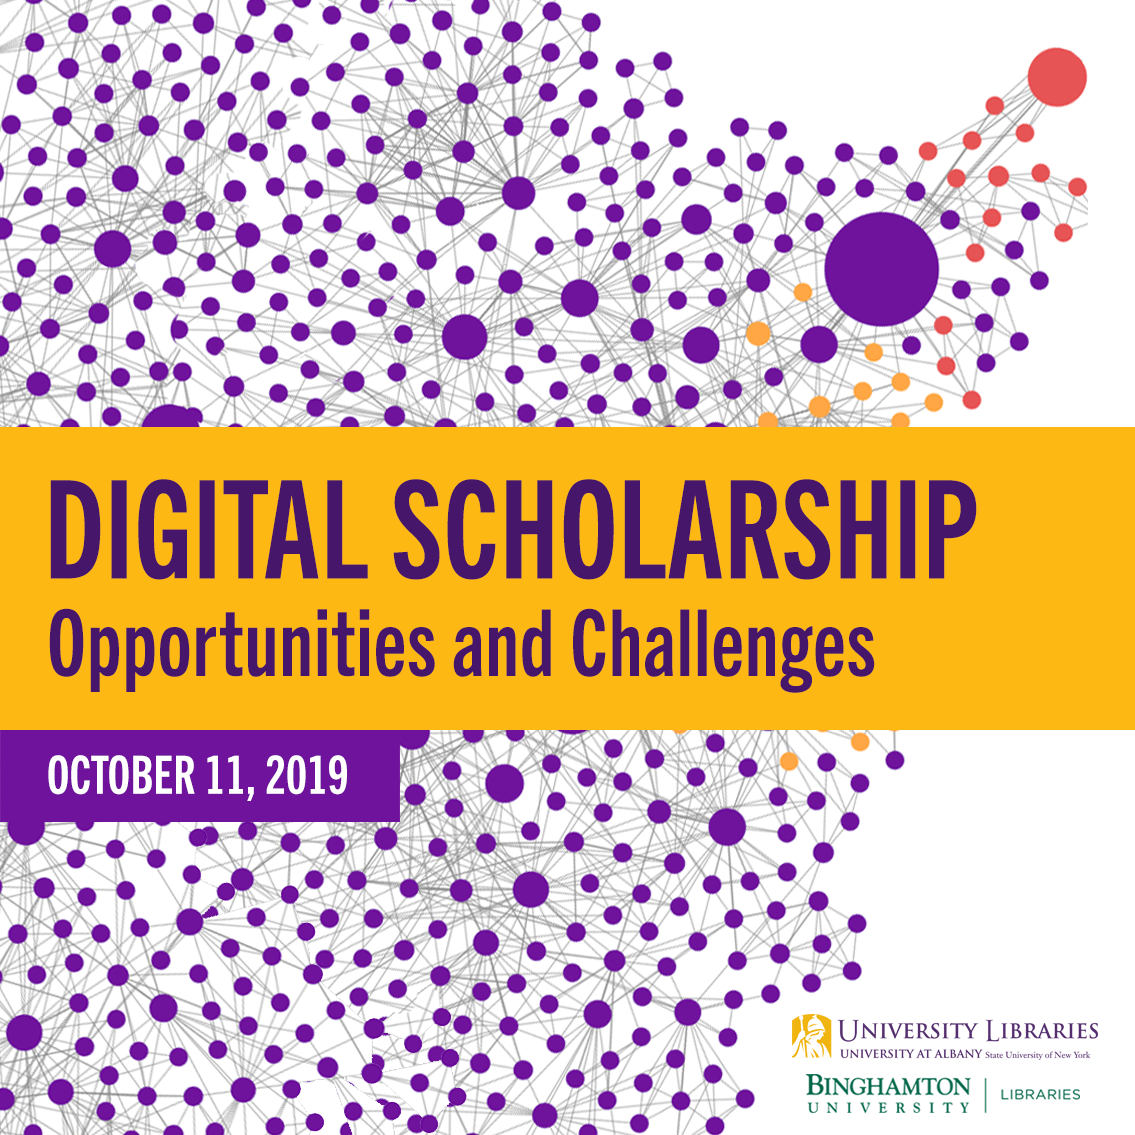 Digital Scholarship: Opportunities and Challenges